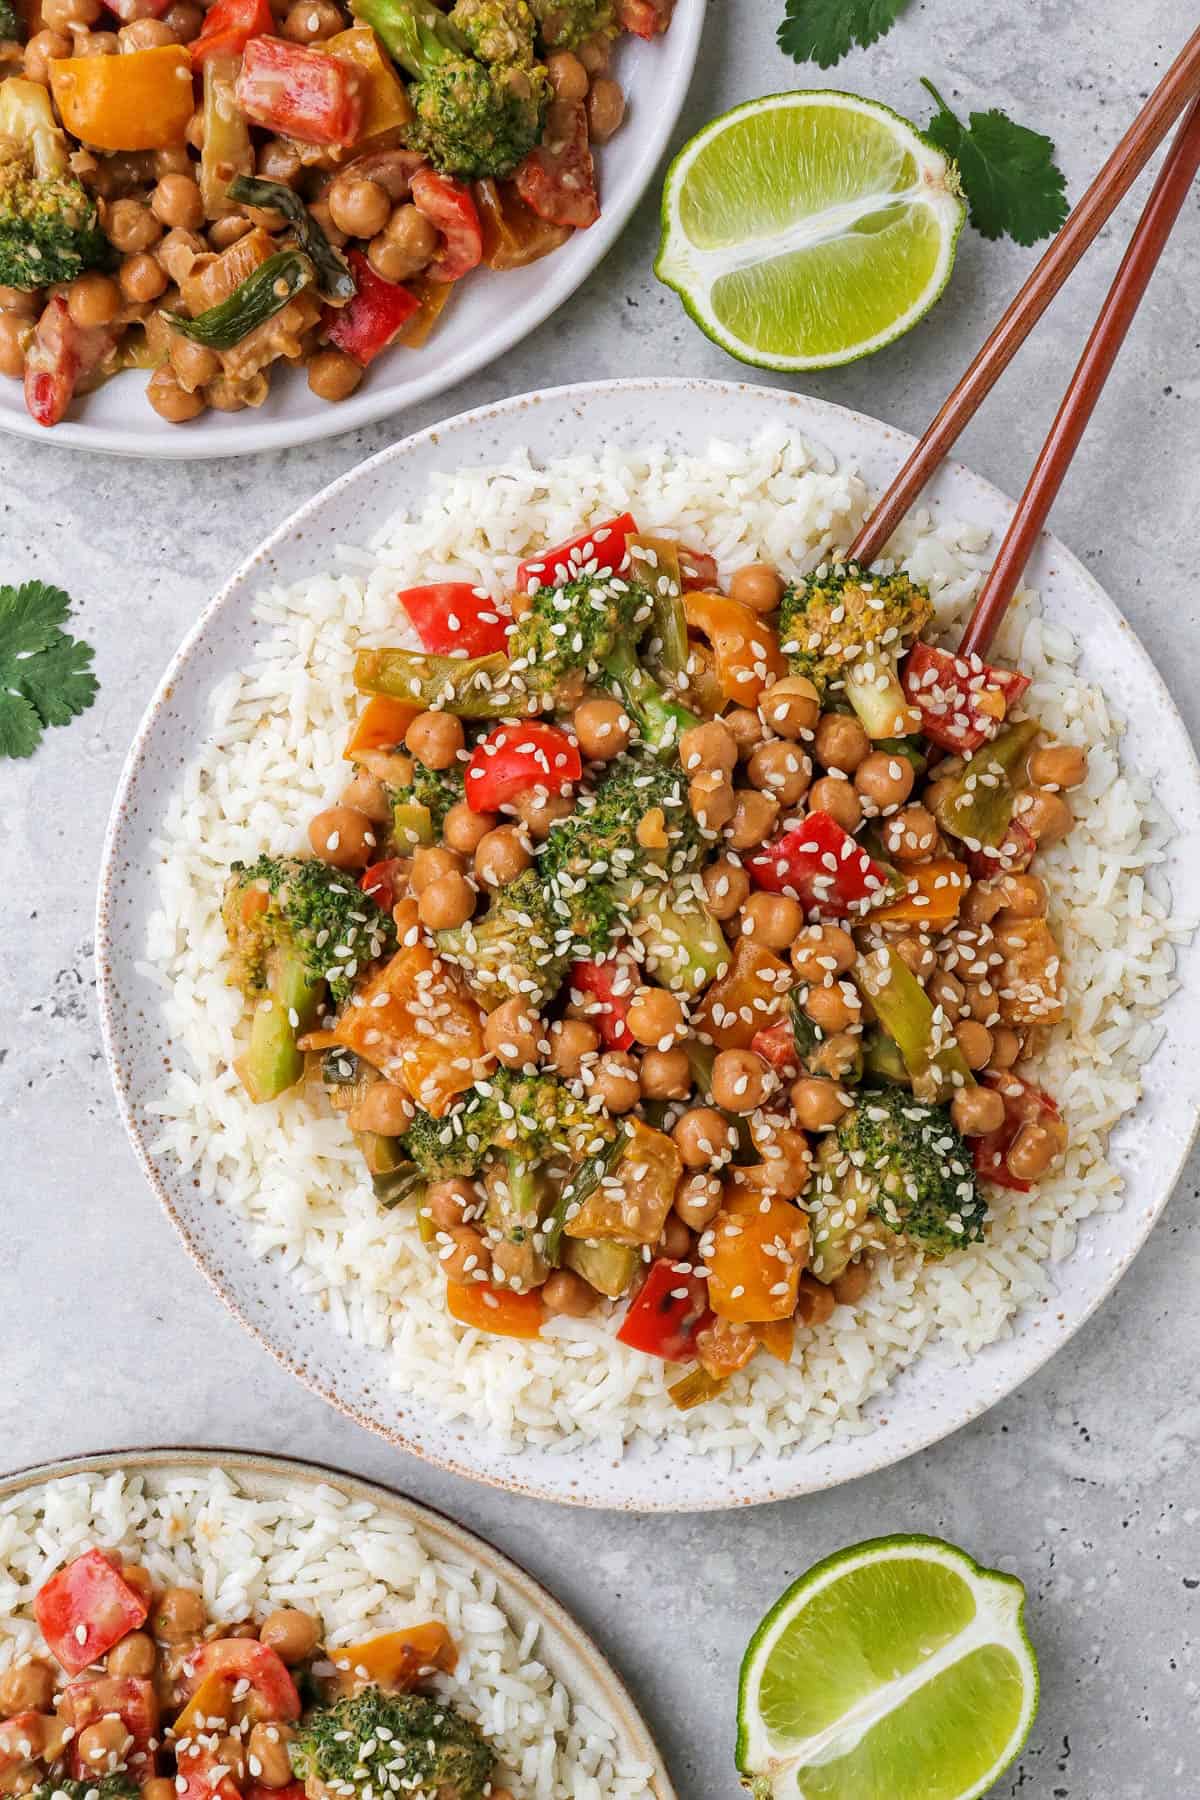 Chickpea vegetable stir fry on 3 plates with rice and chop sticks. Sesame seeds and cut up limes on the side.